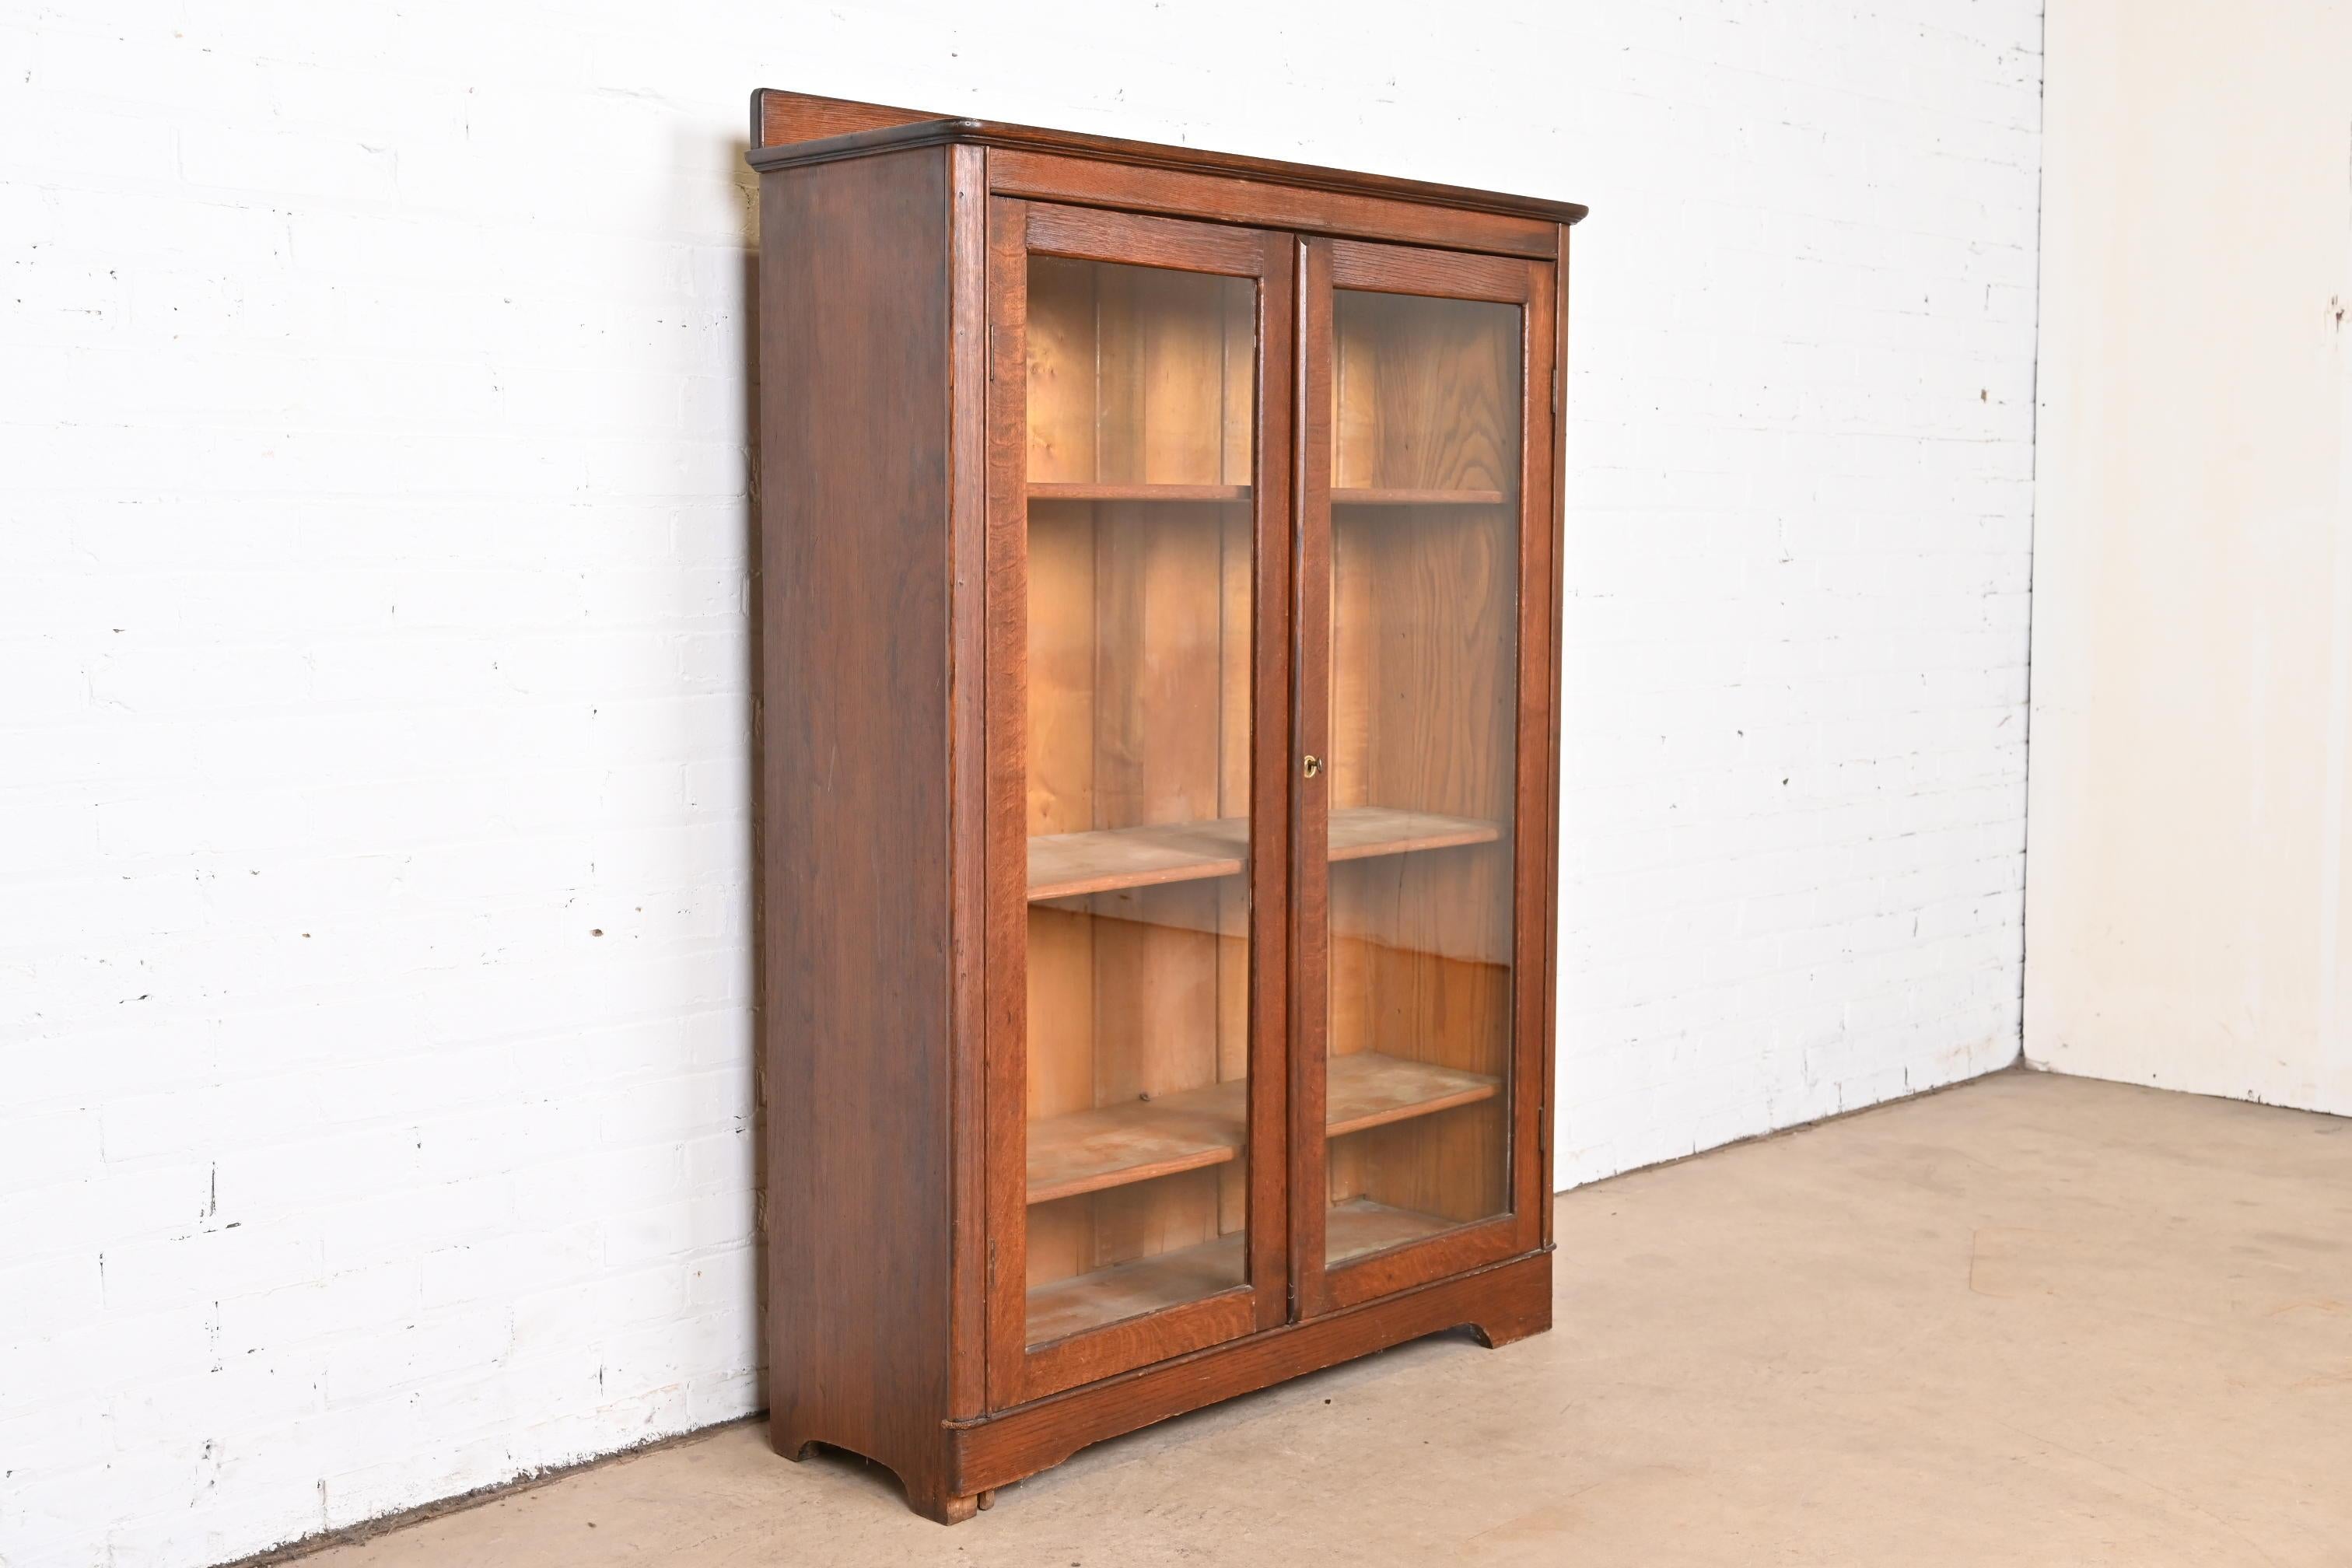 20th Century Antique Arts & Crafts Glass Front Bookcase by Larkin Co., Circa 1900 For Sale